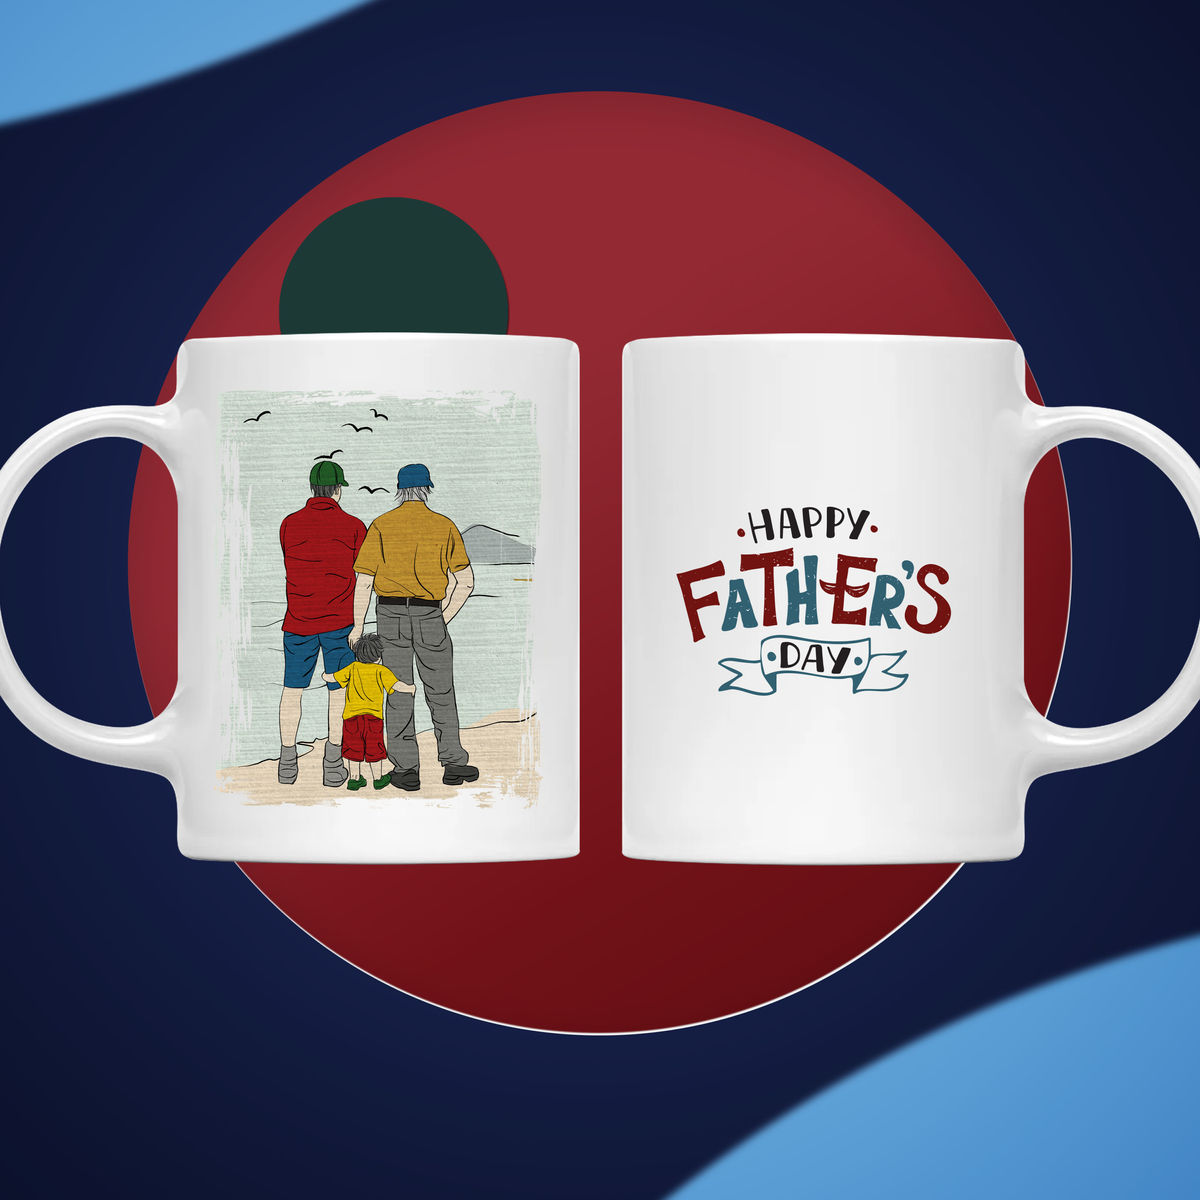 Majestic Moments - Father and Son Gift - Limited Edition